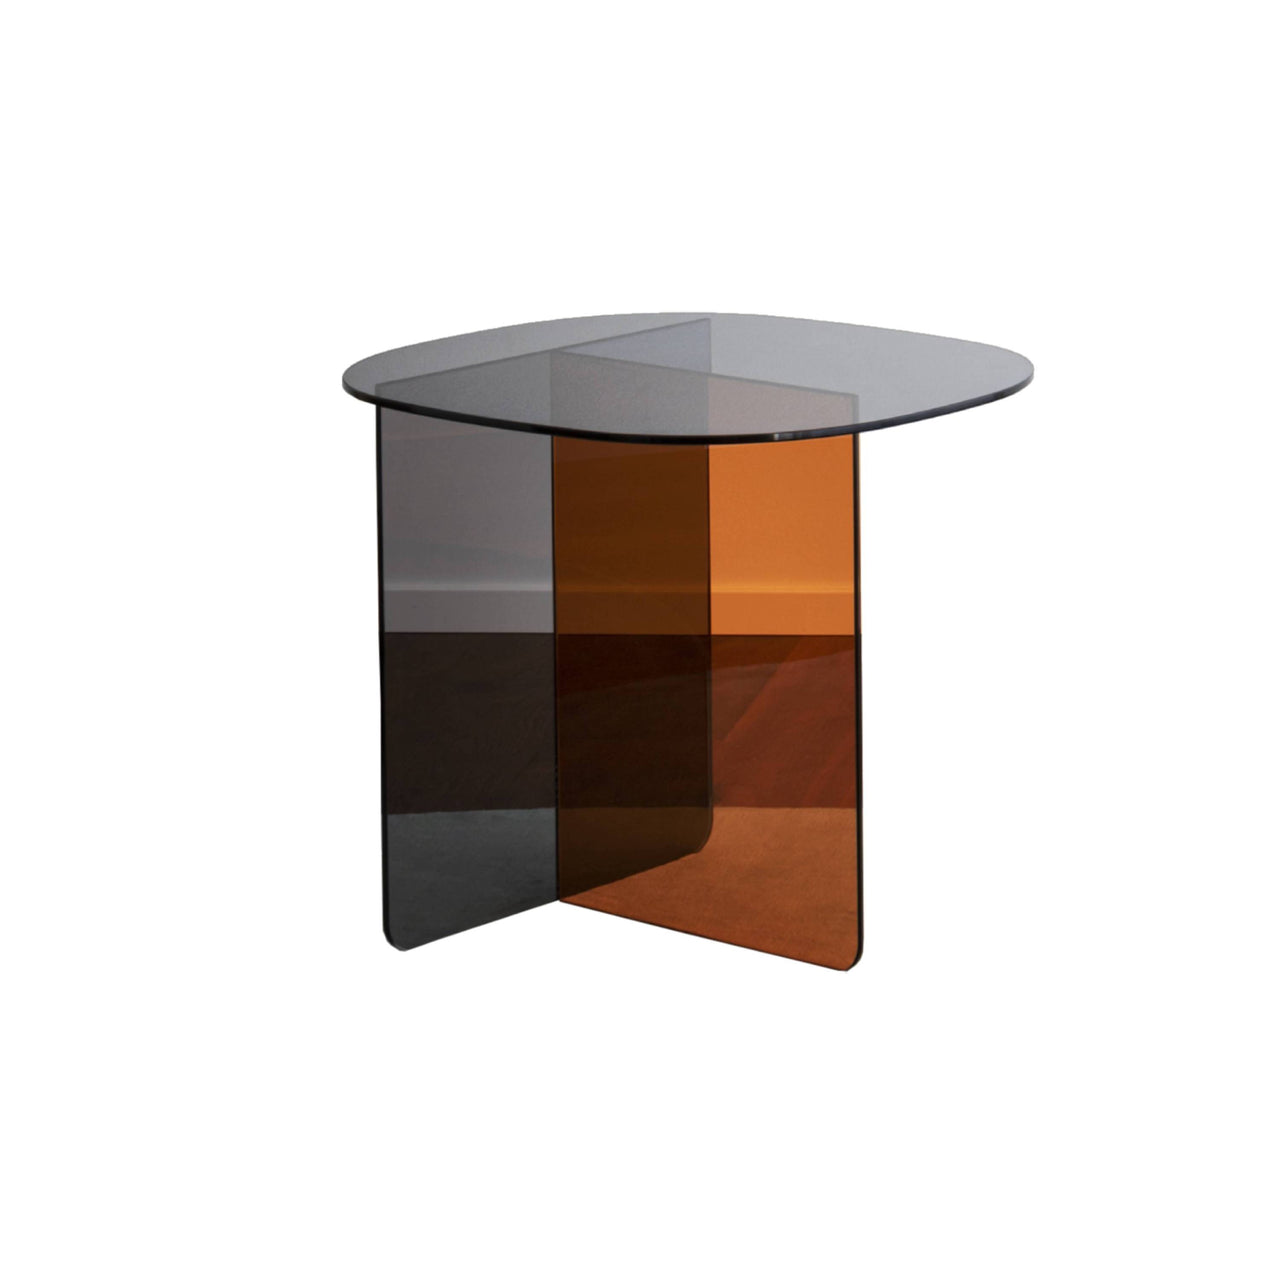 Chap Coffee Table: Small - 23.6